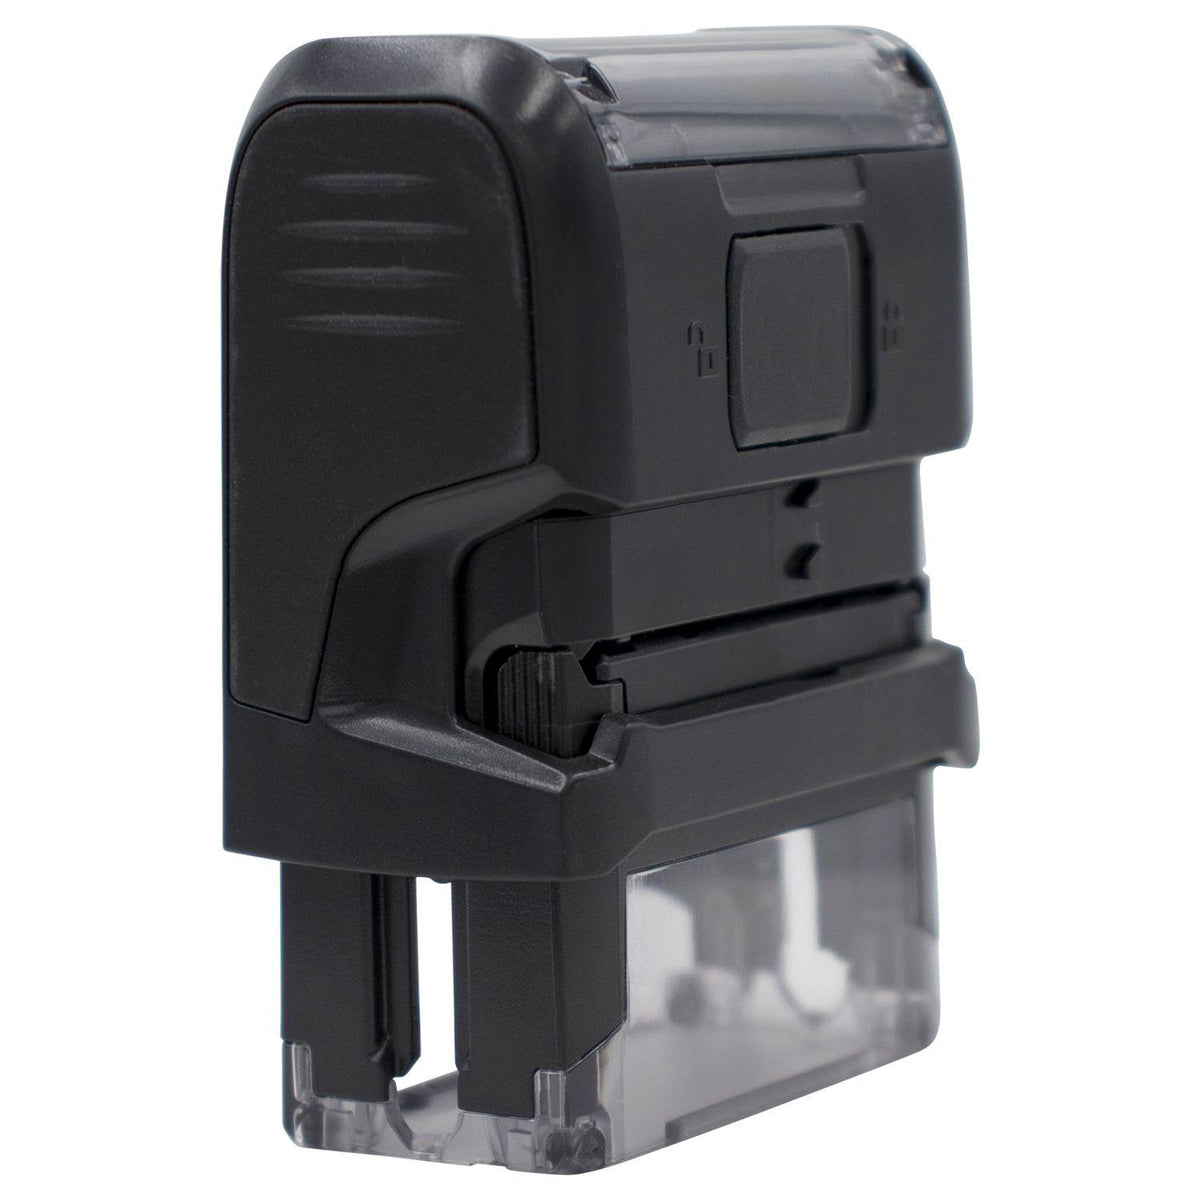 Self-Inking Bold Completed Stamp - Engineer Seal Stamps - Brand_Trodat, Impression Size_Small, Stamp Type_Self-Inking Stamp, Type of Use_General, Type of Use_Office